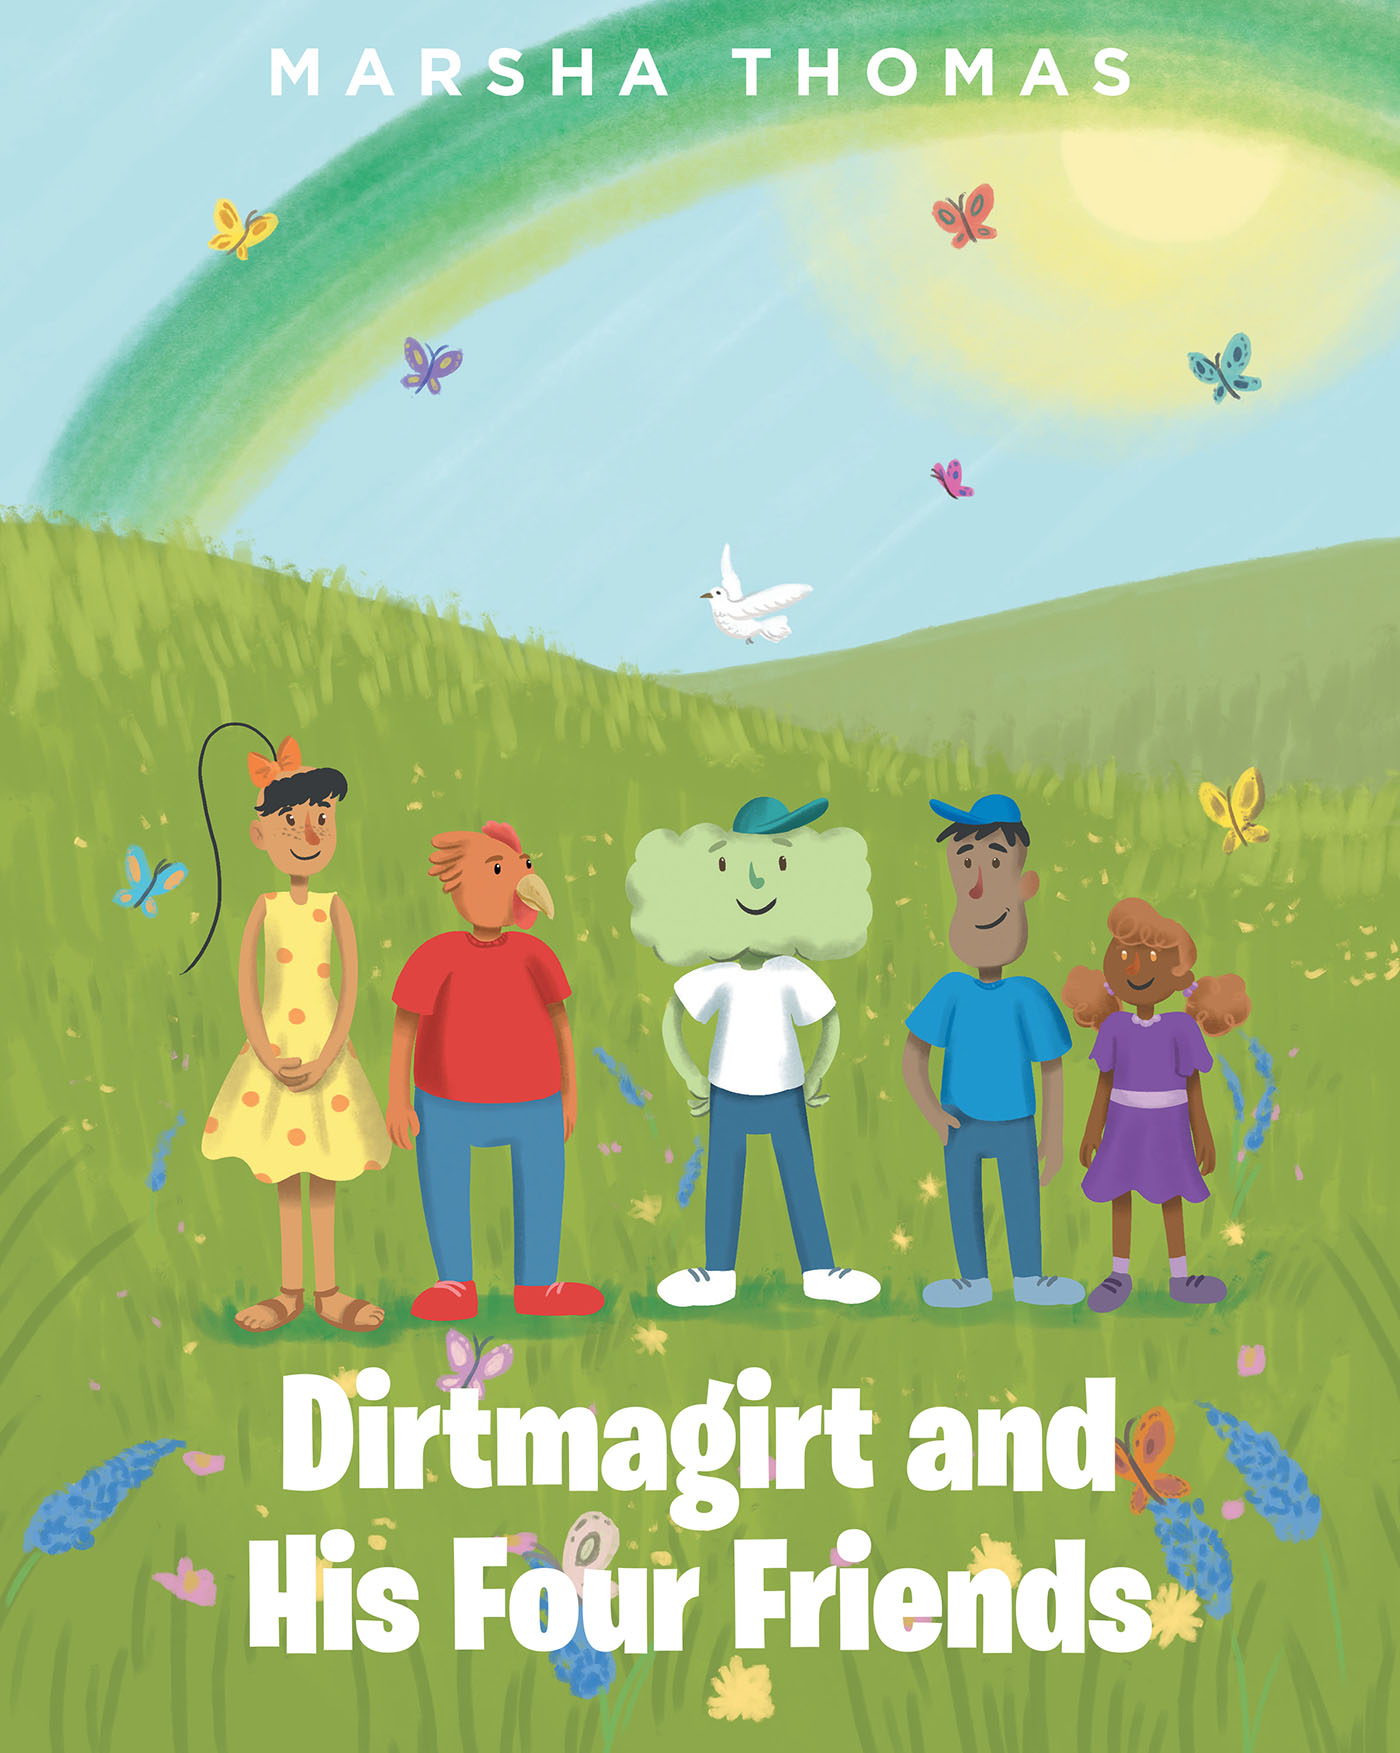 Marsha Thomas’s Newly Released "Dirtmagirt and His Four Friends" is a Unique Tale of Friendship and an Important Lesson of Faith